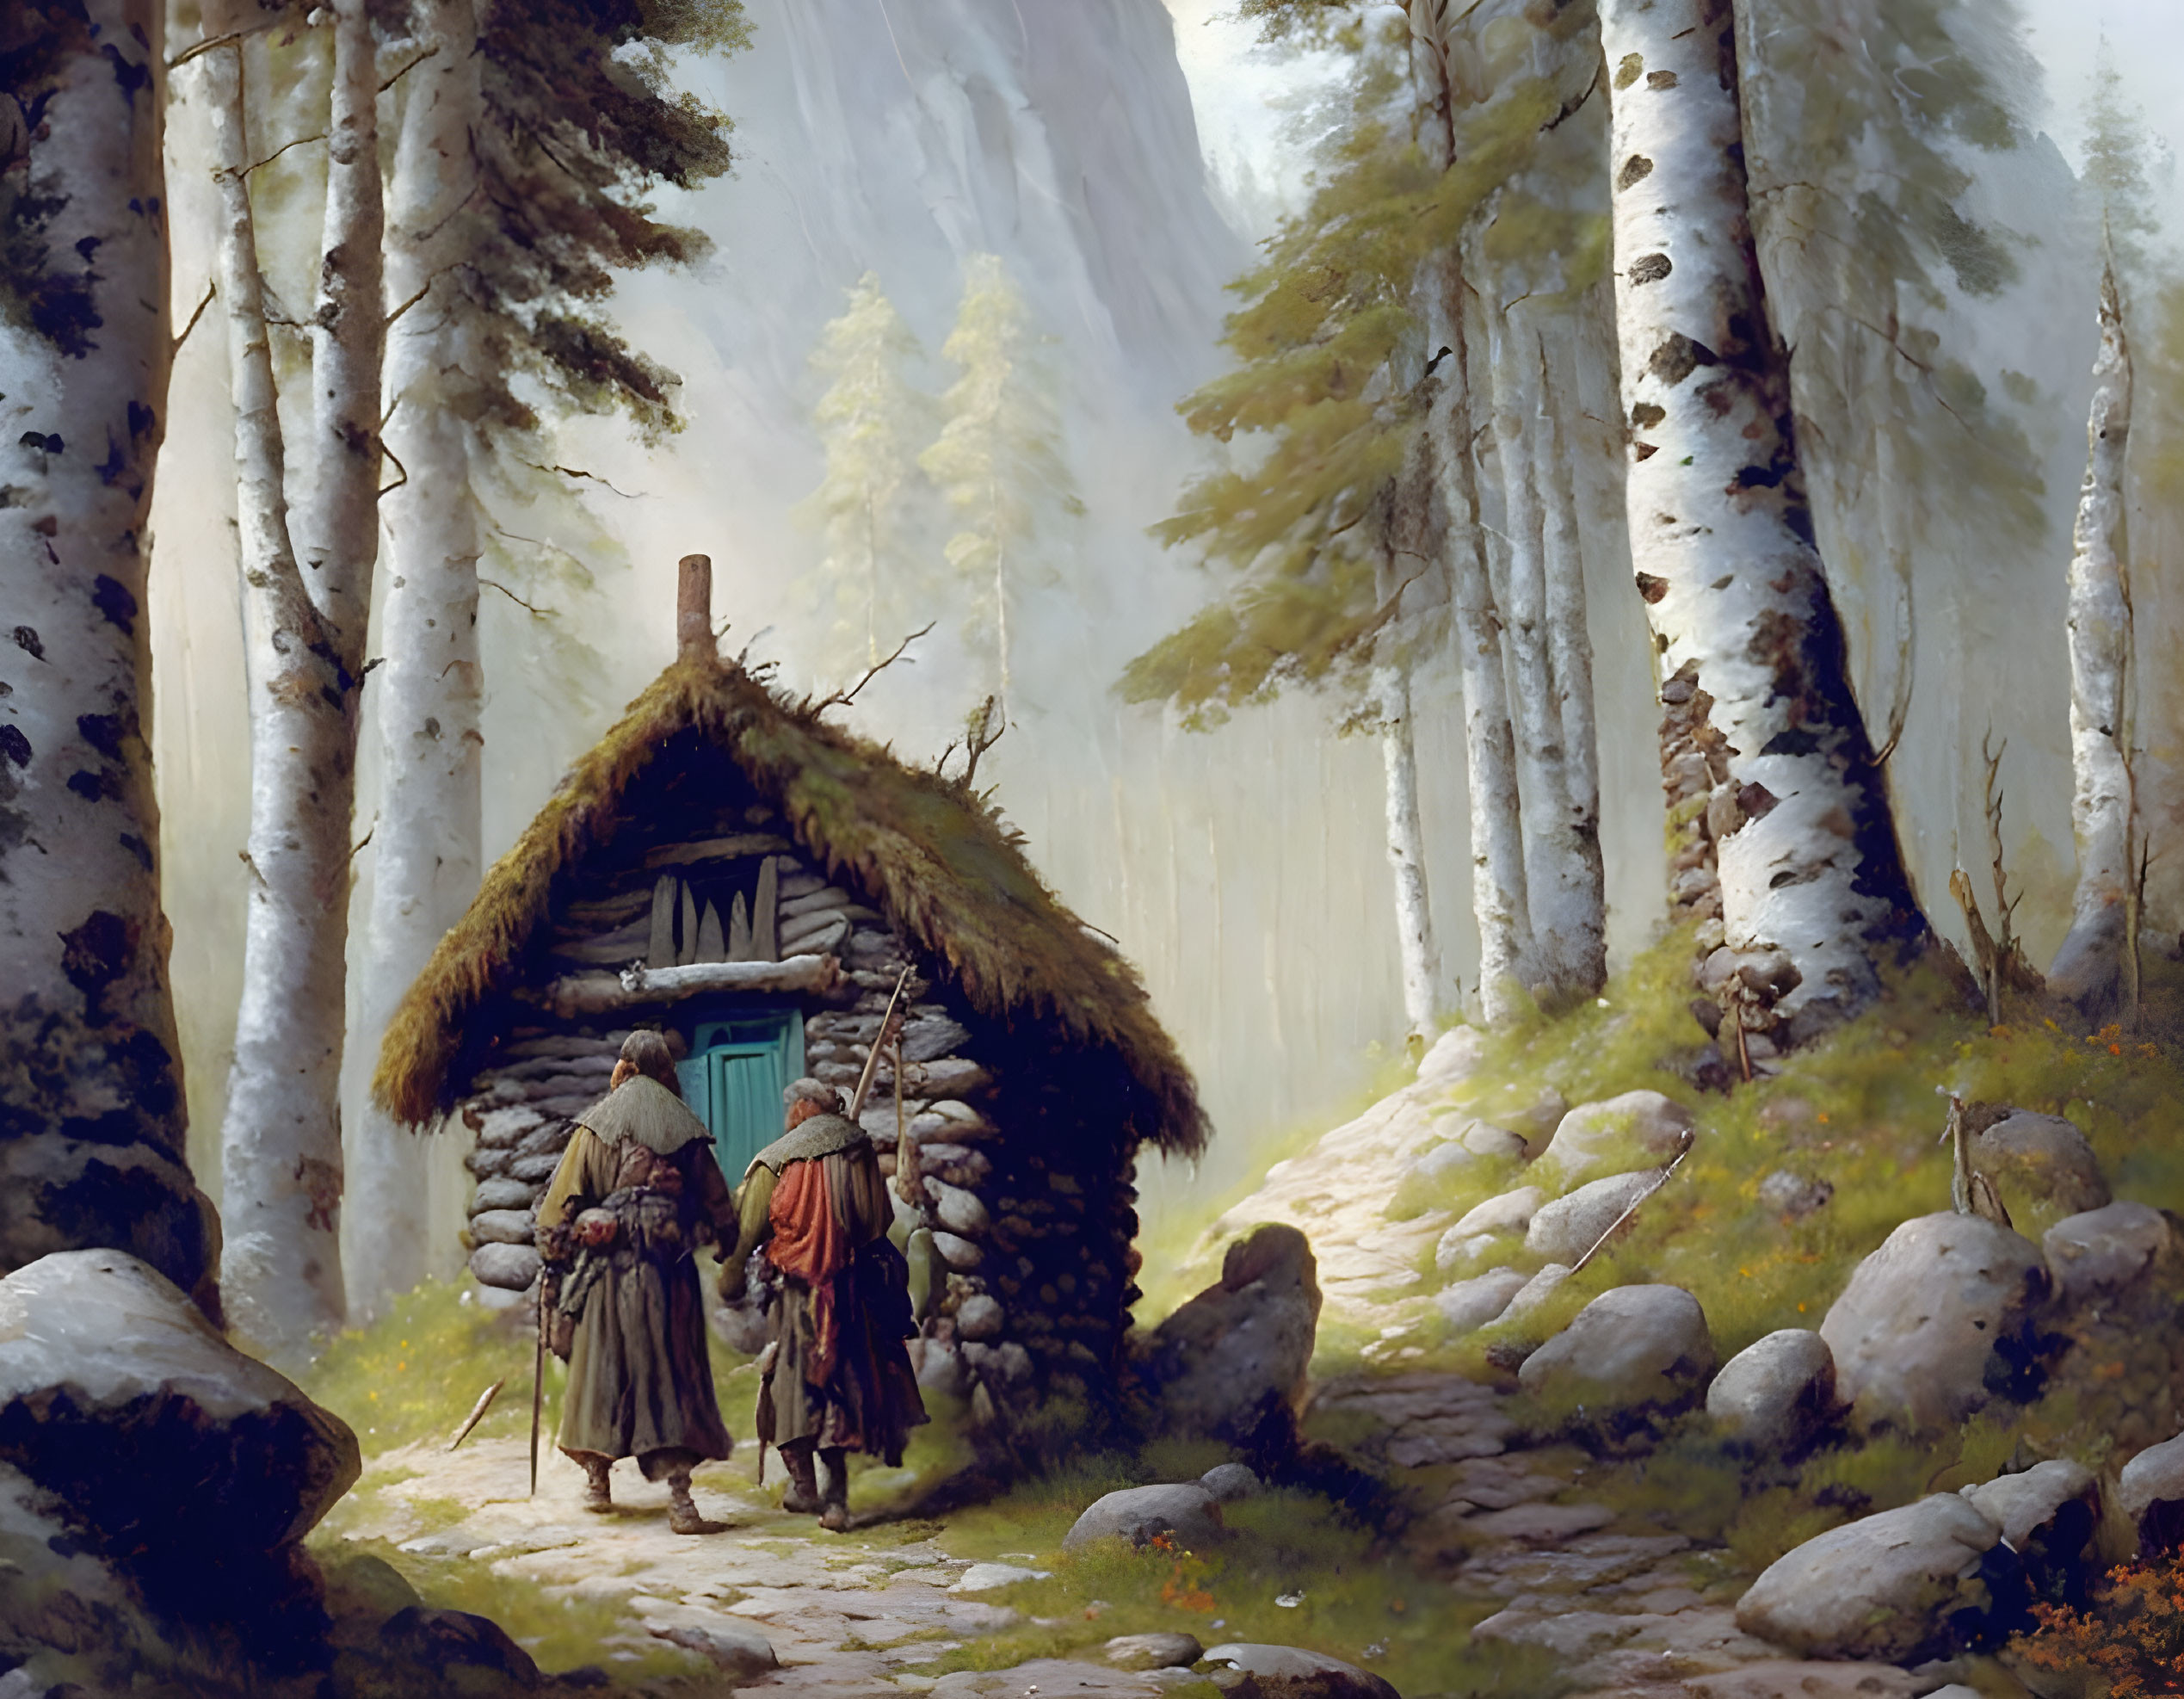 Painting of two adventurers